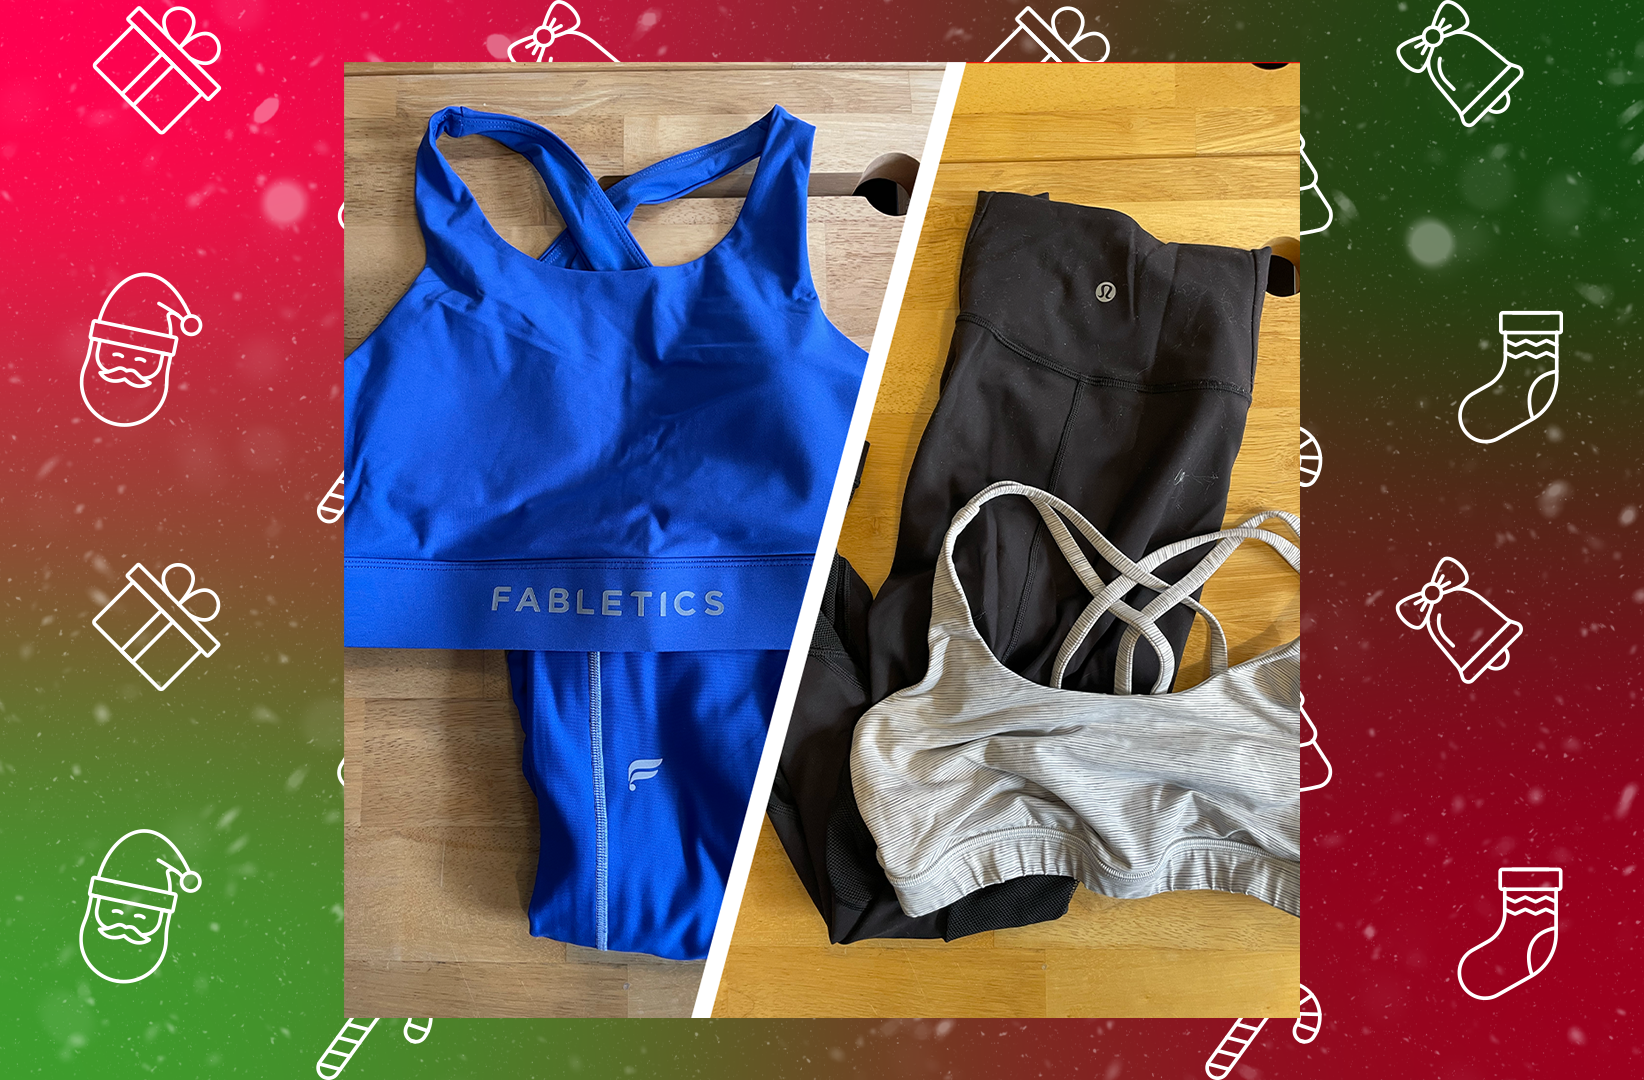 Fabletics vs. lululemon: Find the Perfect Fit for Holiday Gifting